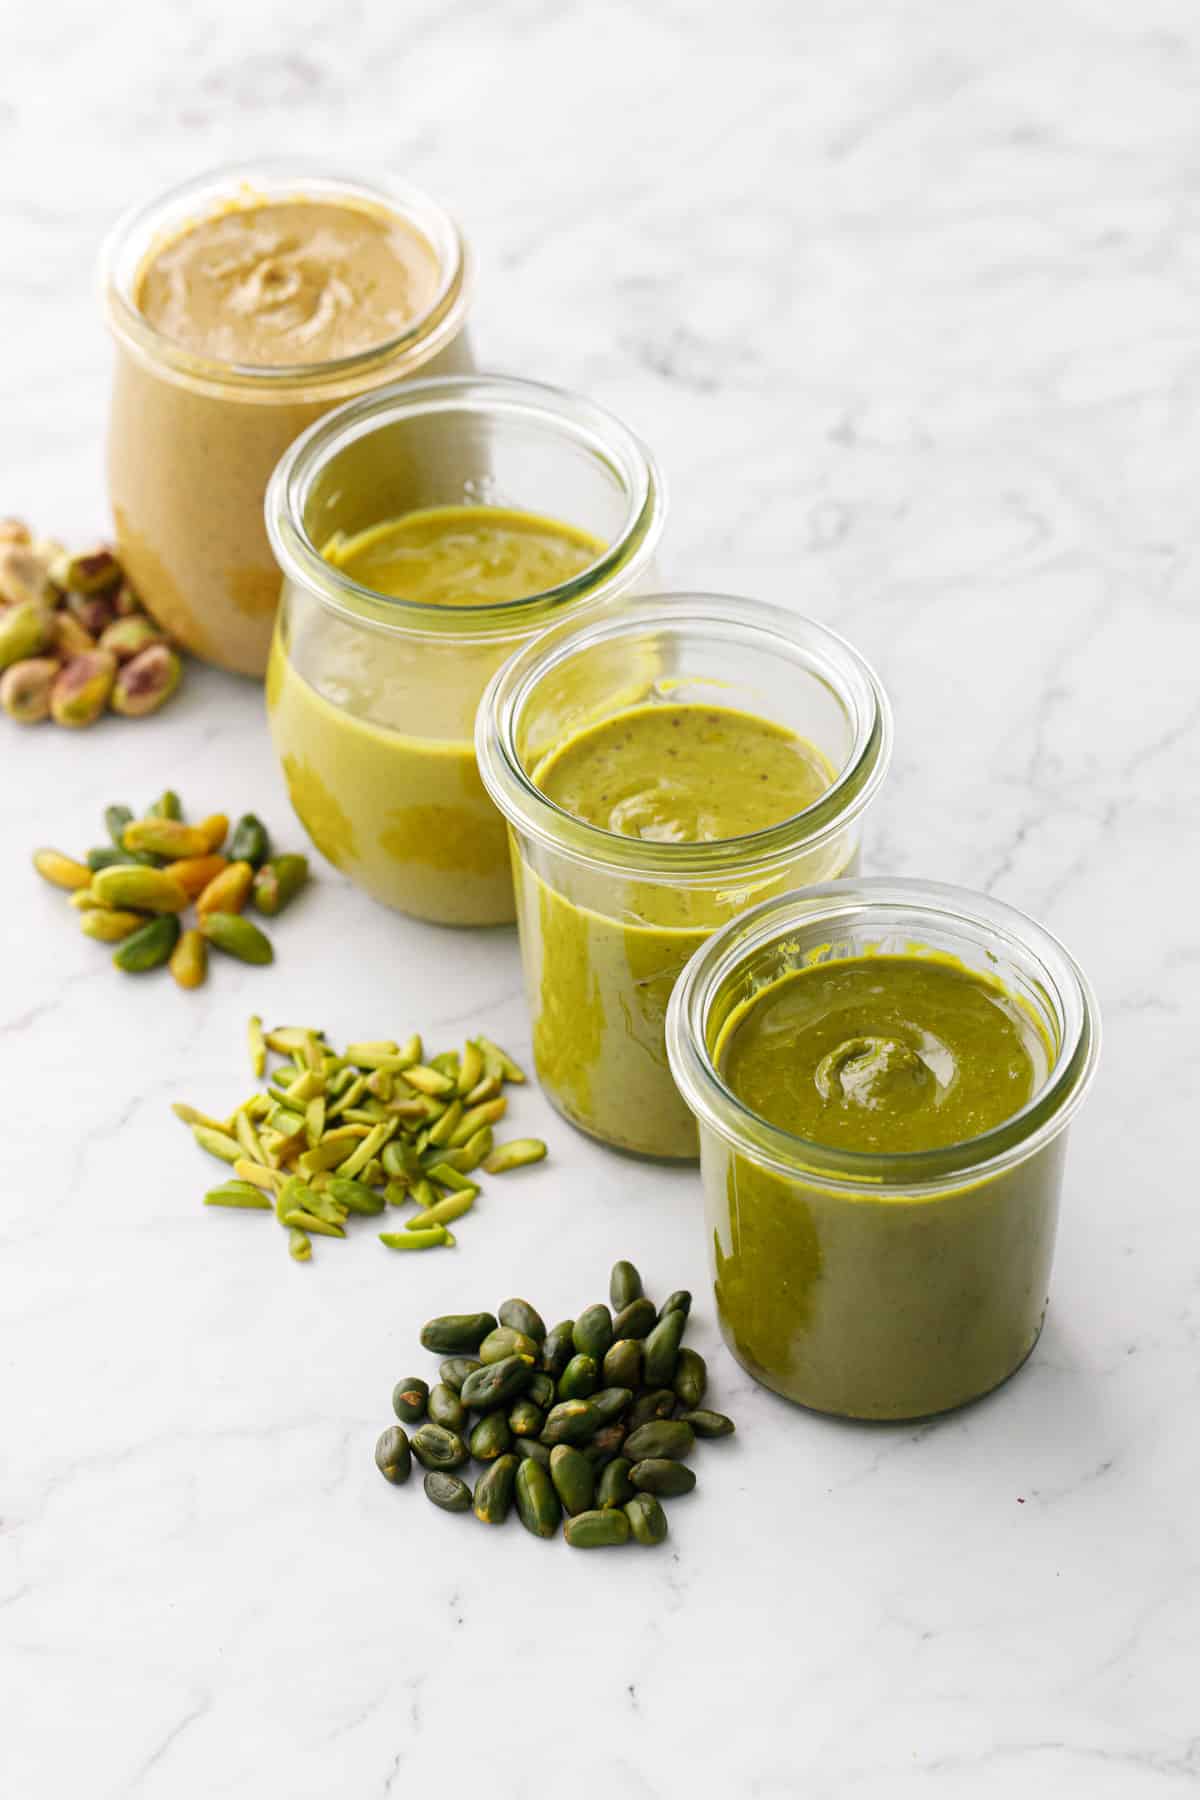 Four jars of Homemade Pistachio Butter in varying colors grading from brown to green, with the nut used to make it in a pile next to each jar.